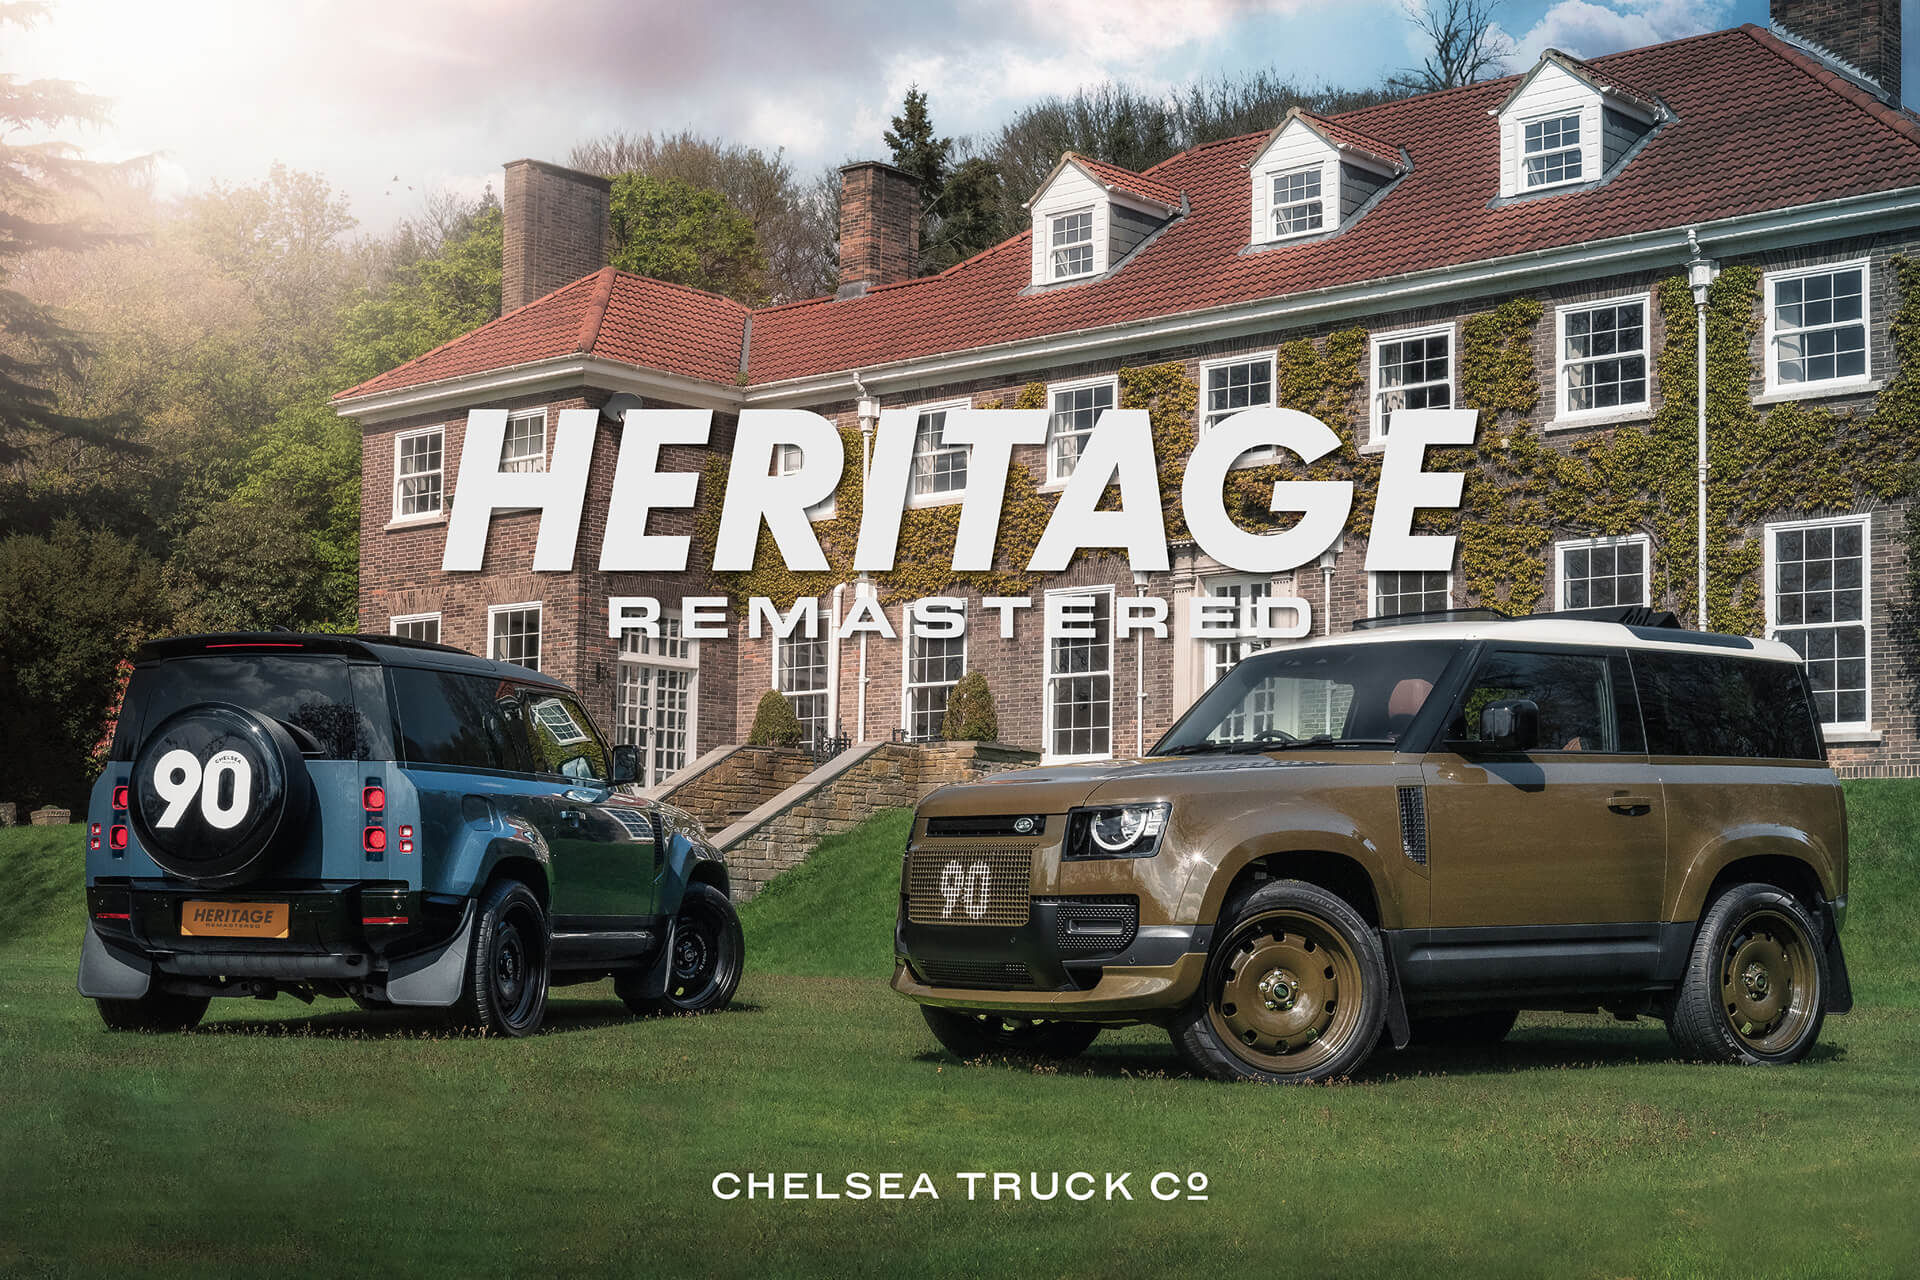 Chelsea Truck Company: Bespoke Luxury Vehicles and Parts